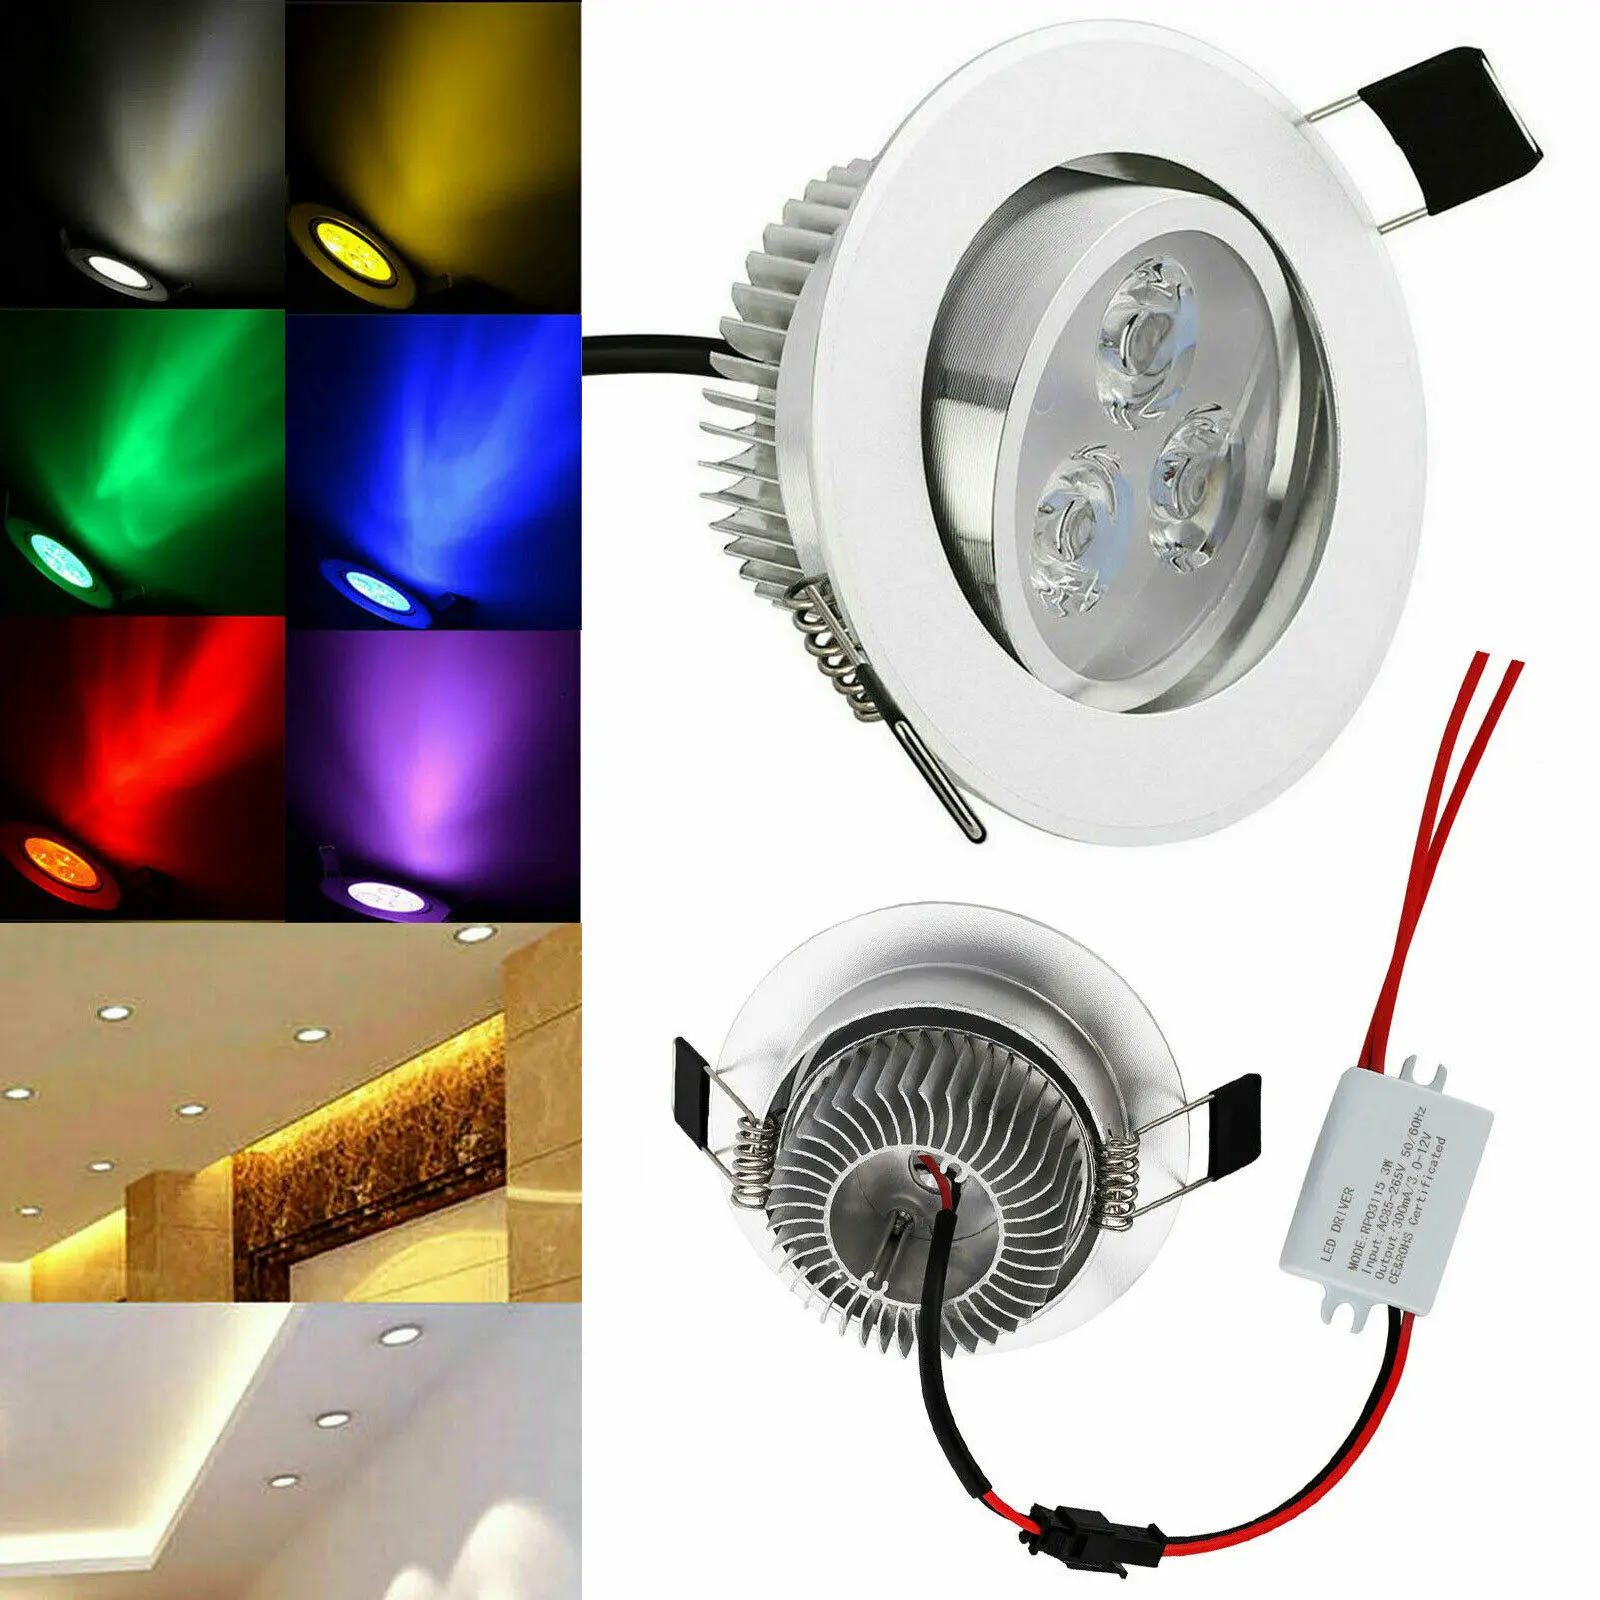 

3W 6W Recessed LED Ceiling Downlight Spotlight Dimmable Lighting Lamp Bulb White Free Driver Red Yellow Blue Green Purple Indoor